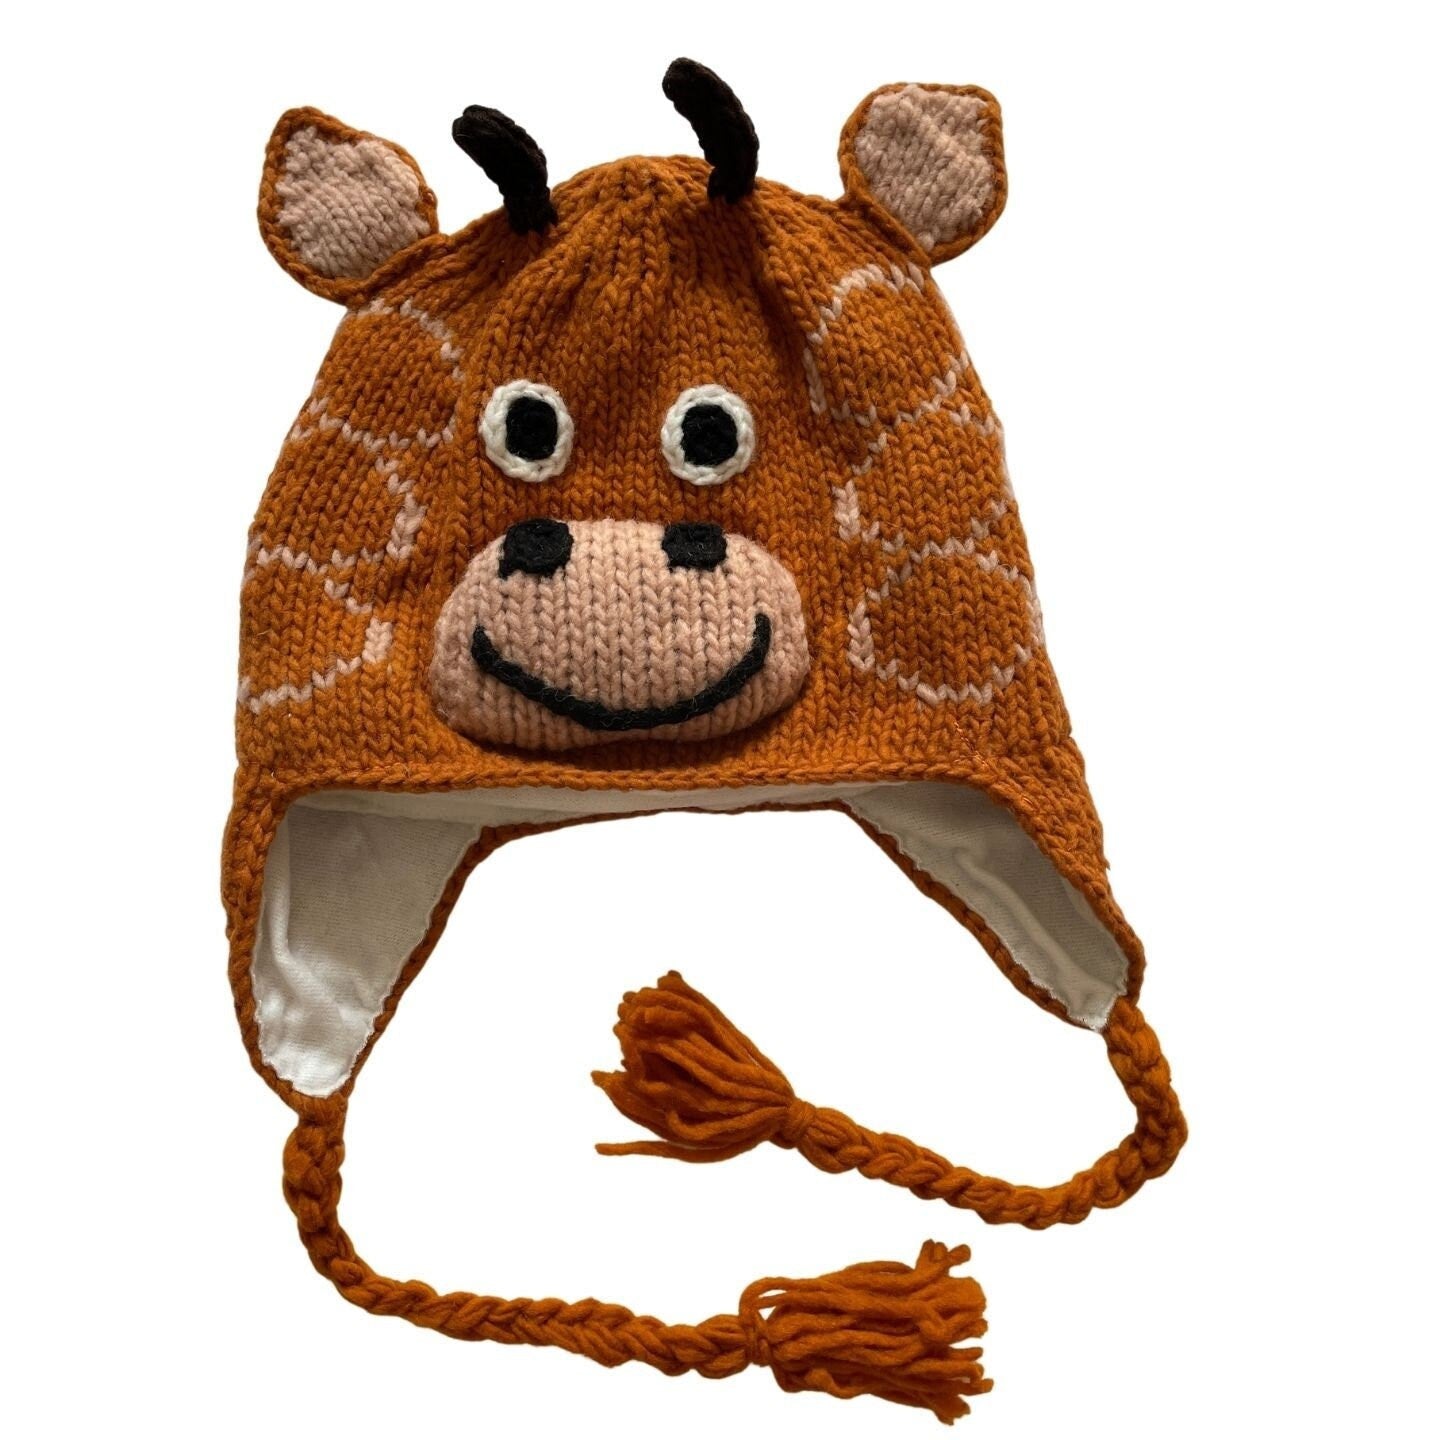 Giraffe Beanie Hats for Kids and Adults